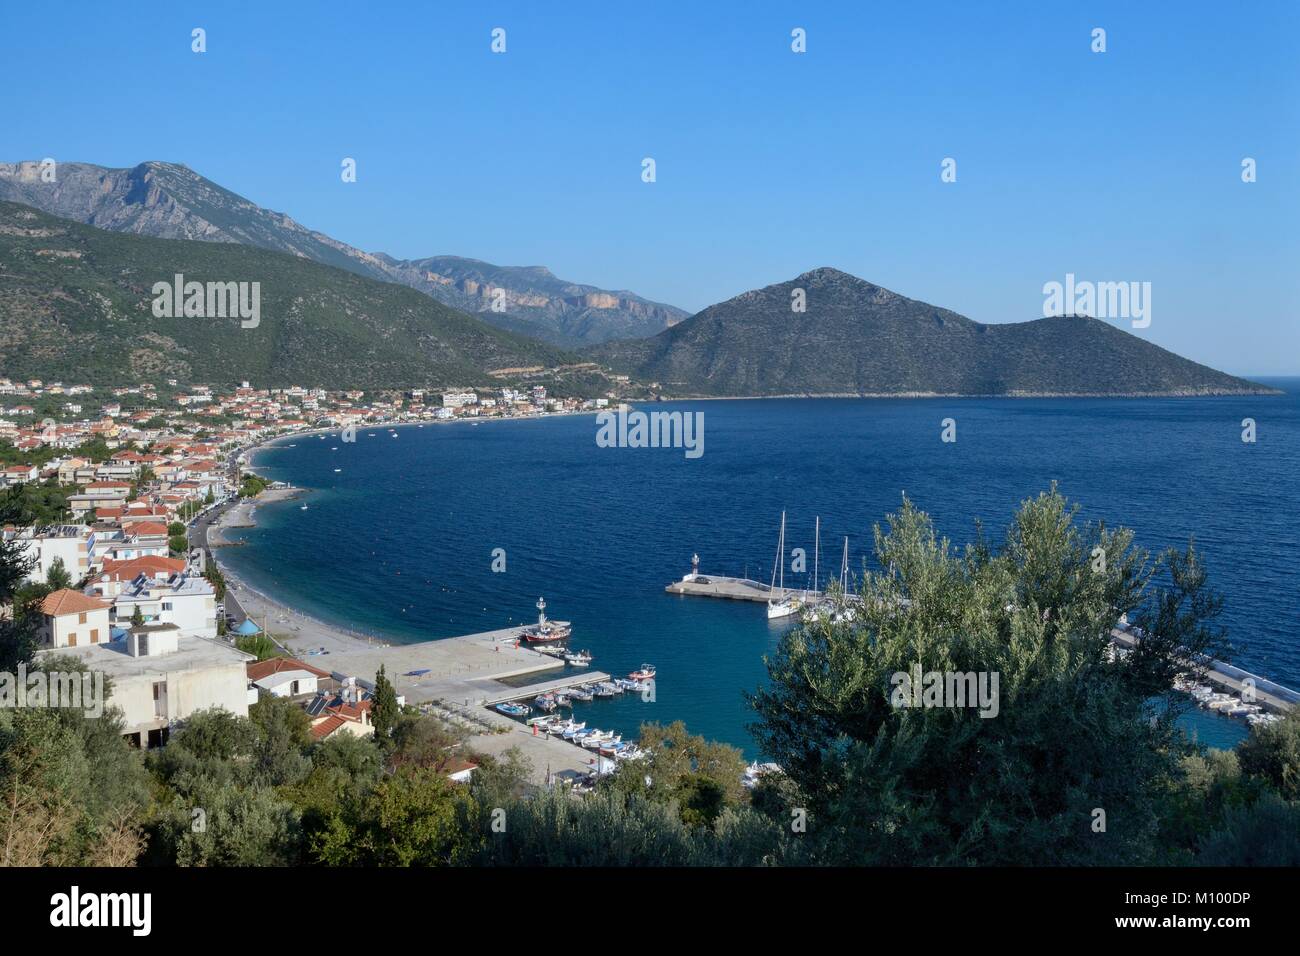 Overview of Tyros harbour and village with the mountains of Arcadia in the background, Peloponnese, Greece, August. Stock Photo